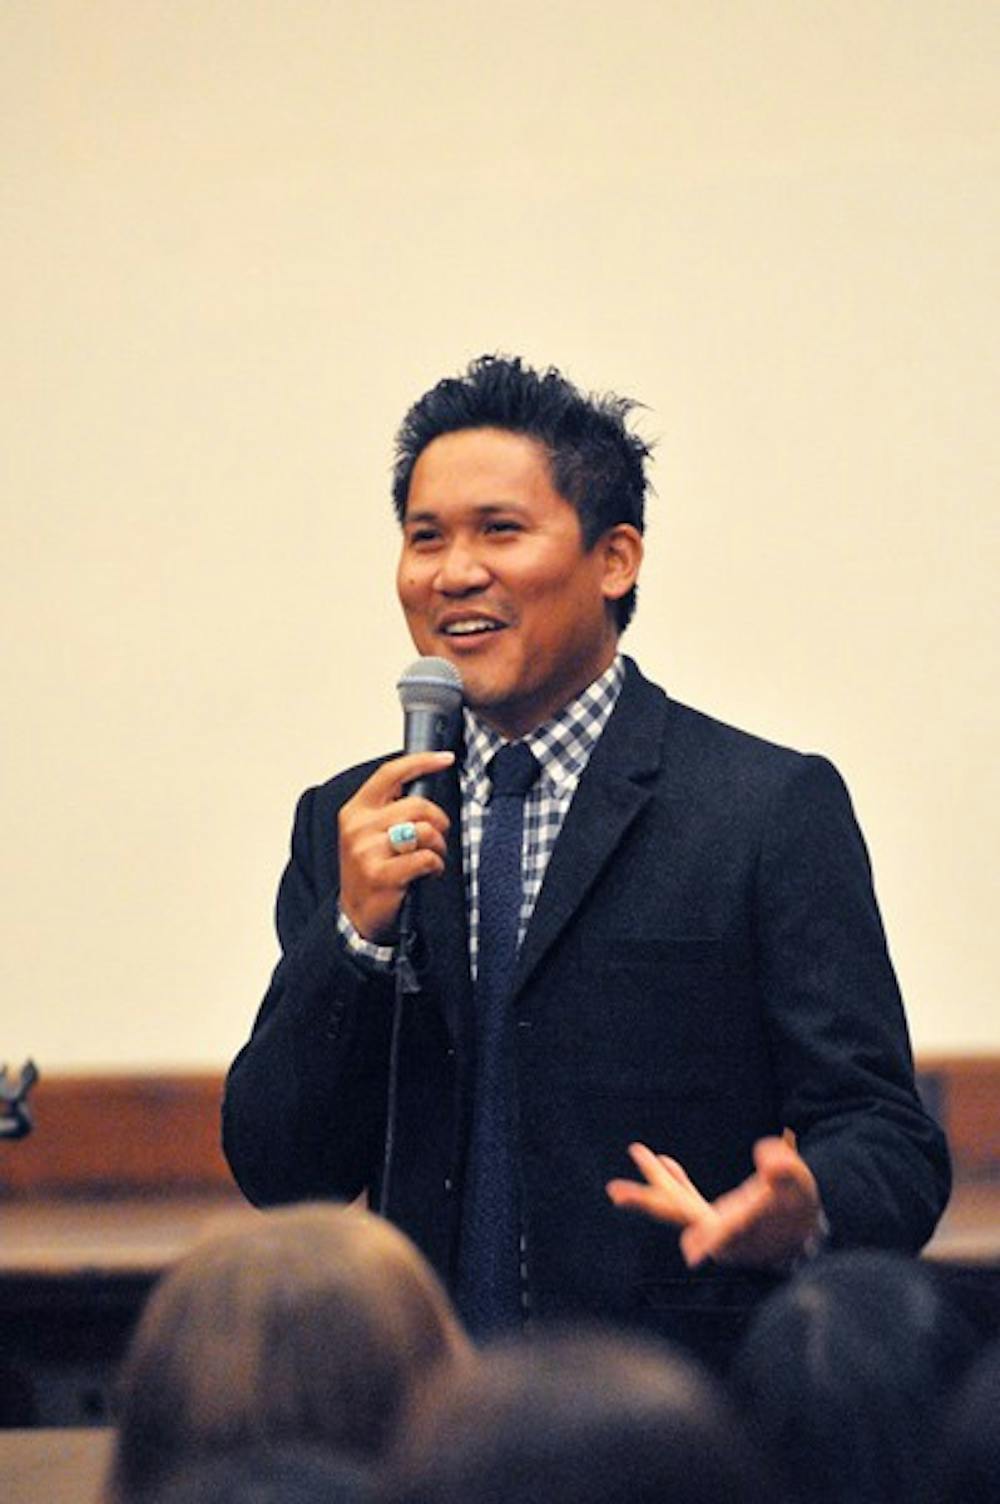 Actor Dante Basco gives a speech in Houston Hall for Philipino American History Month